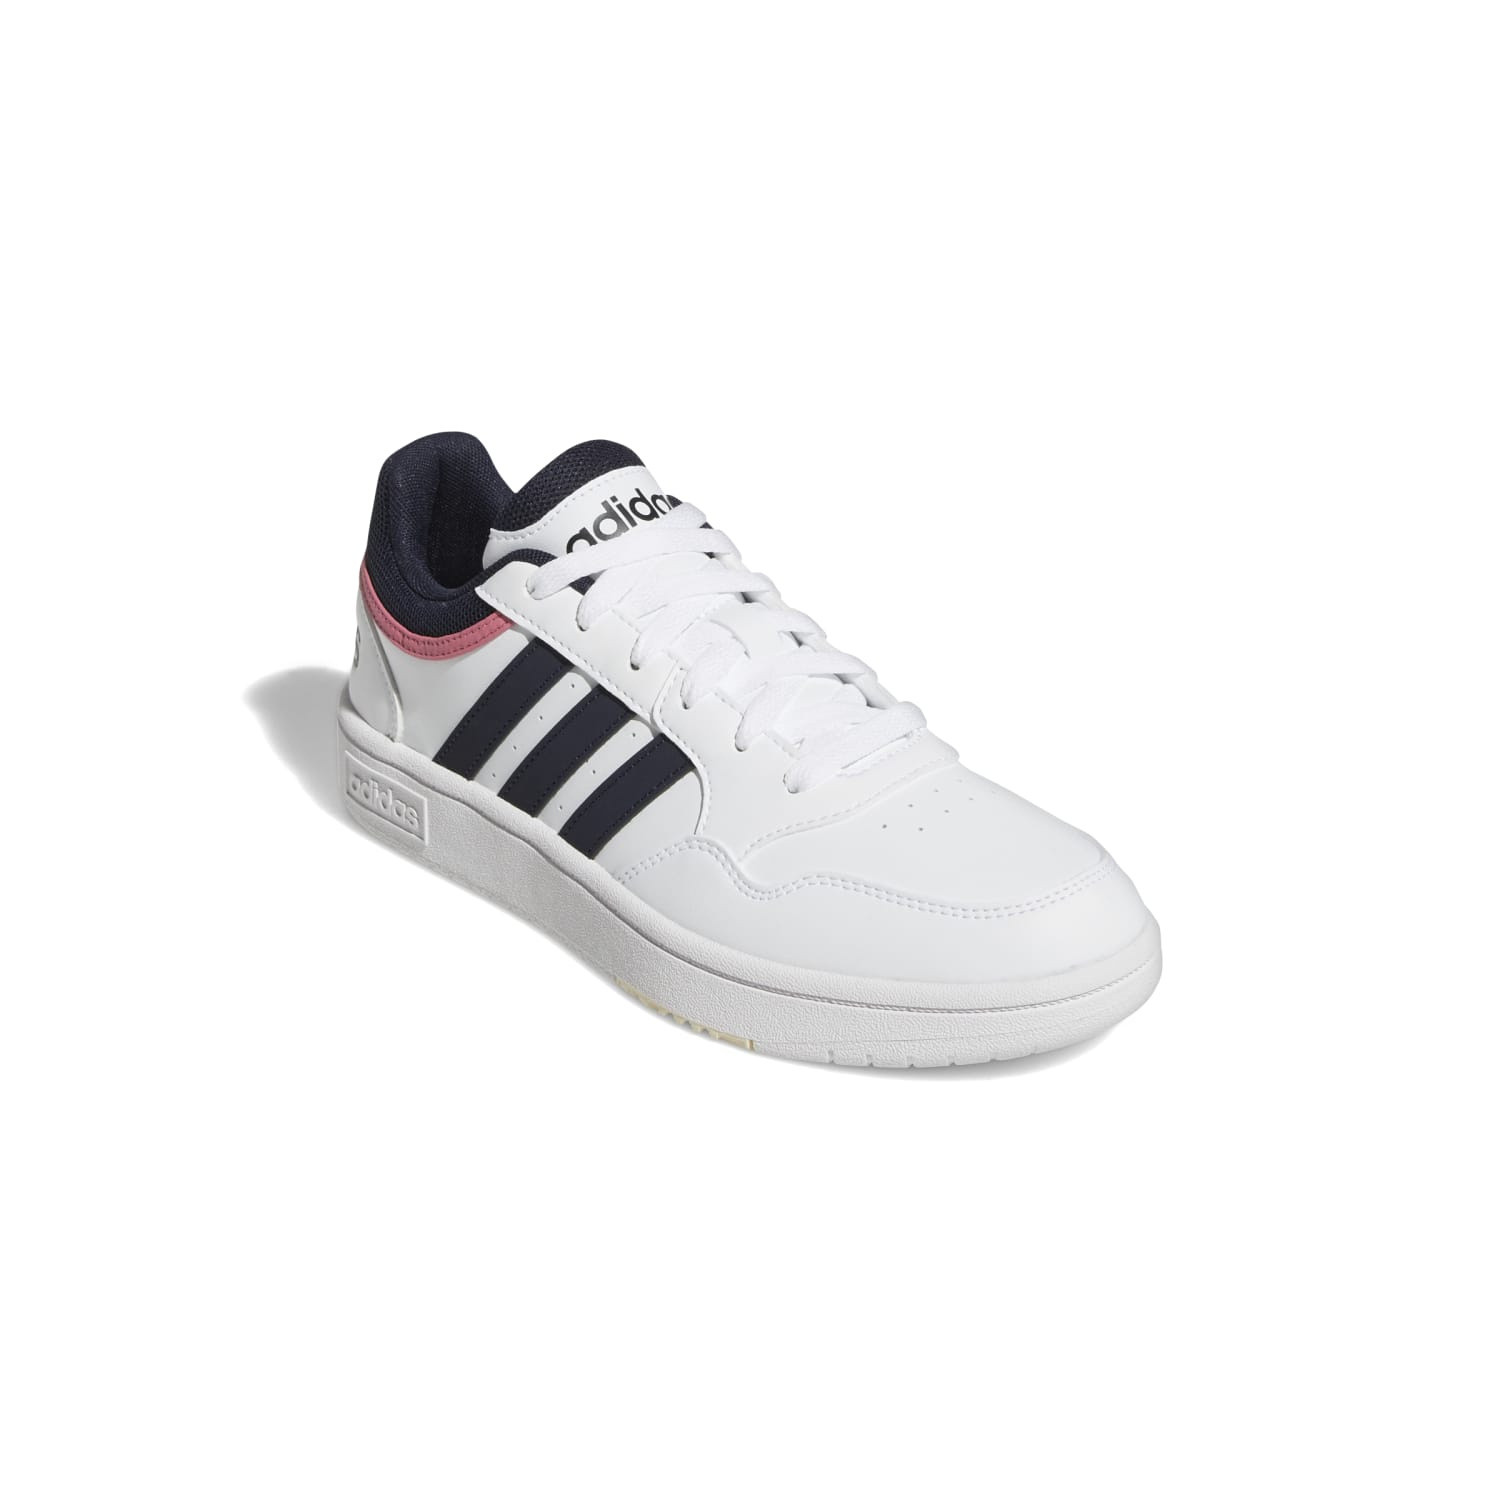 Adidas - Scarpe Hoops 3.0 Low Classic, Bianco, large image number 1